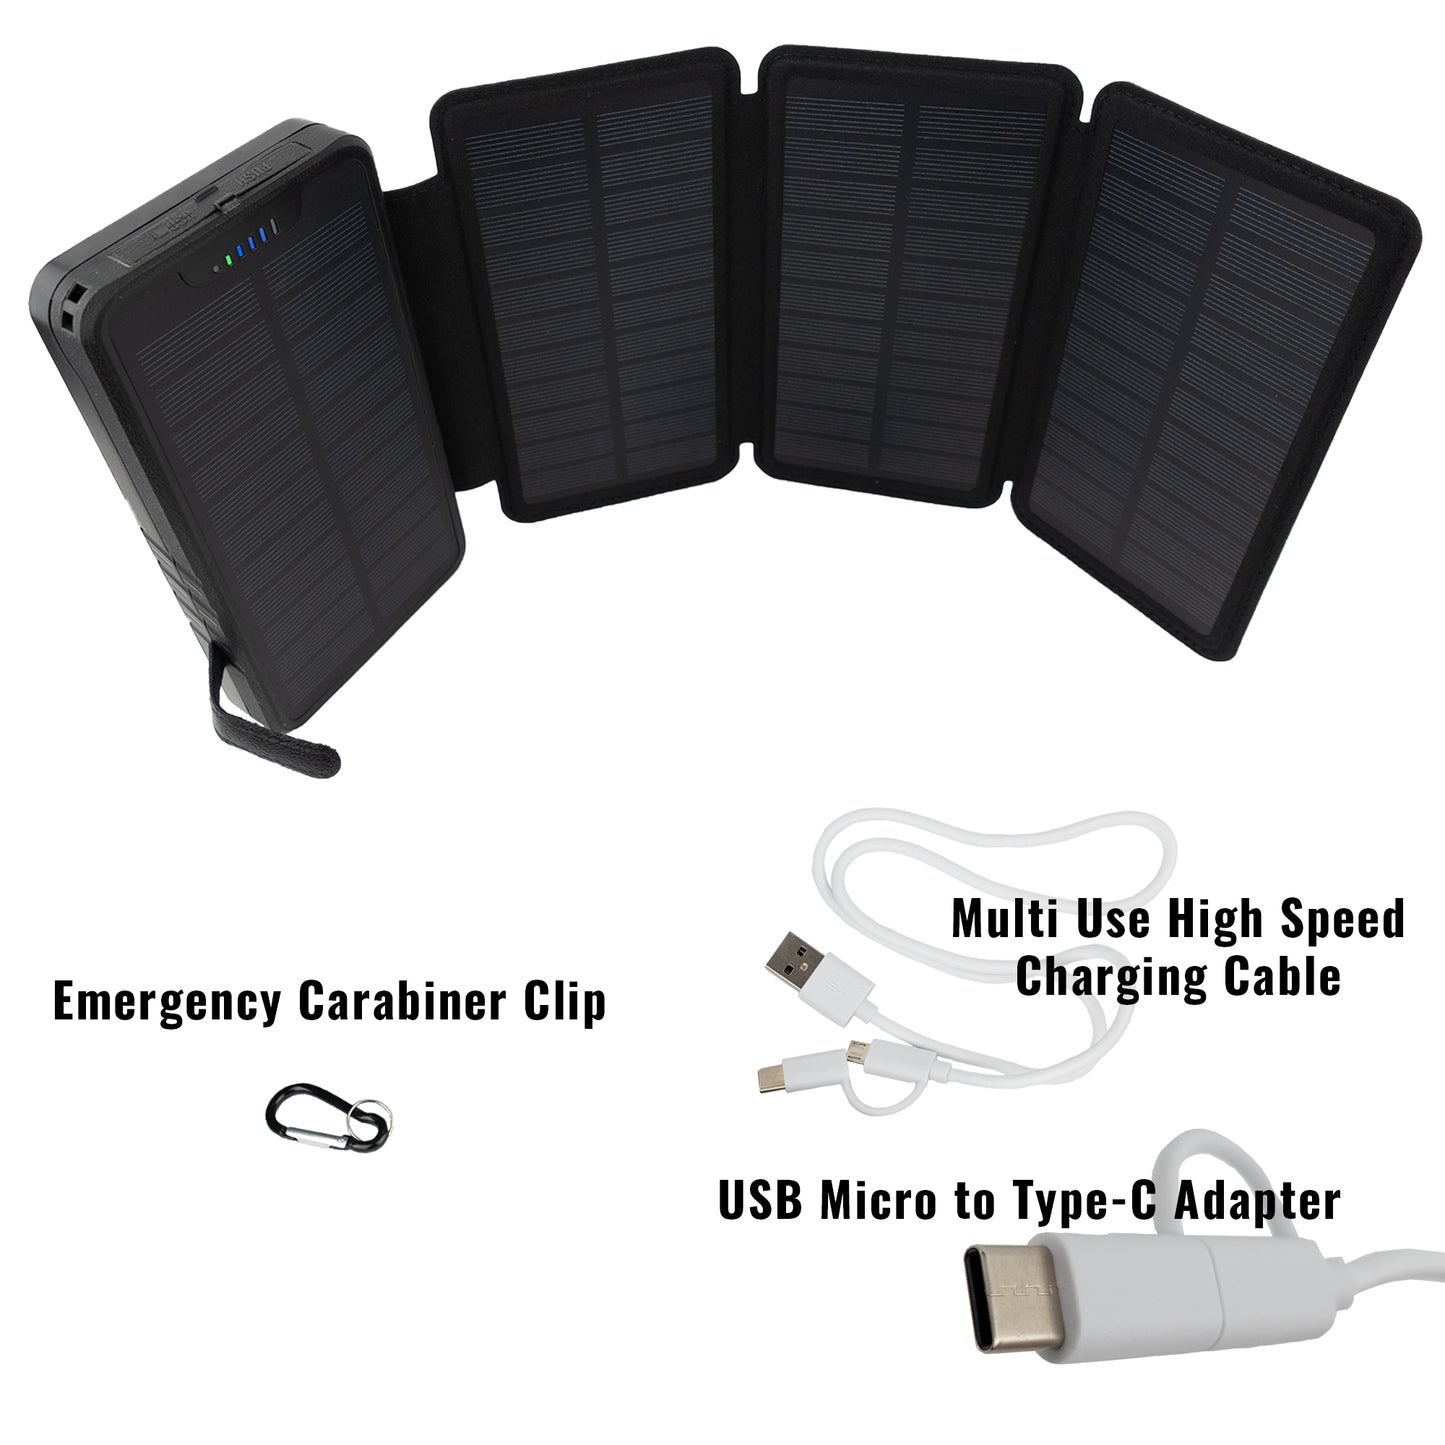 Tough Light 820S 4 Panel USB Solar Power Bank Charger - 20,000mAh Li Polymer with USB Phone Charging - 2AMP High Speed Cable Included